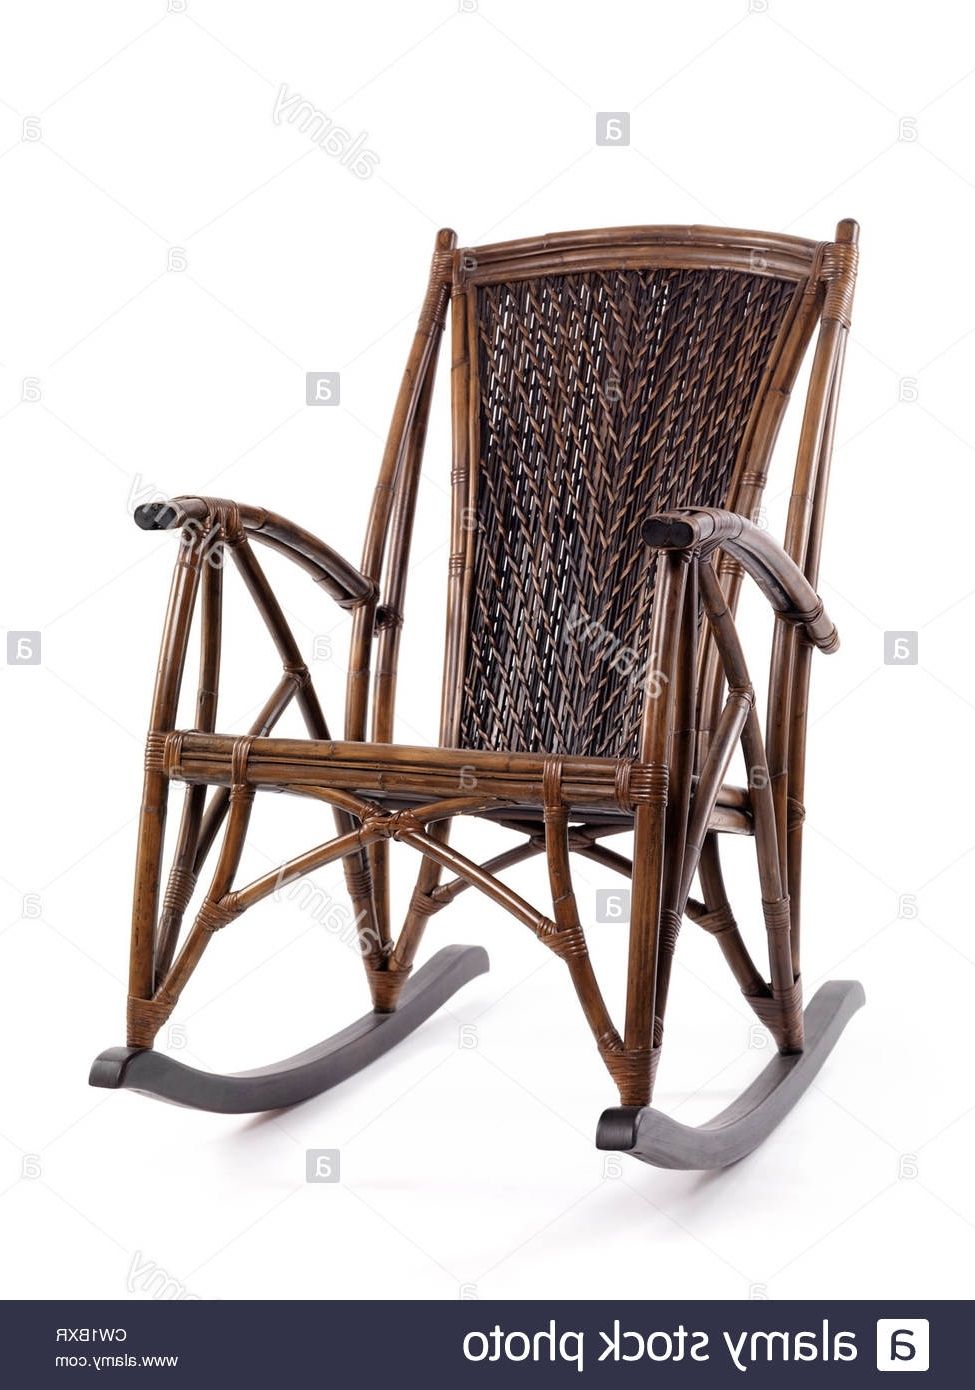 Antique Wicker Rocking Chairs With Regard To Recent Antique Wicker Rocking Chair Isolated On White Background Stock (View 18 of 20)